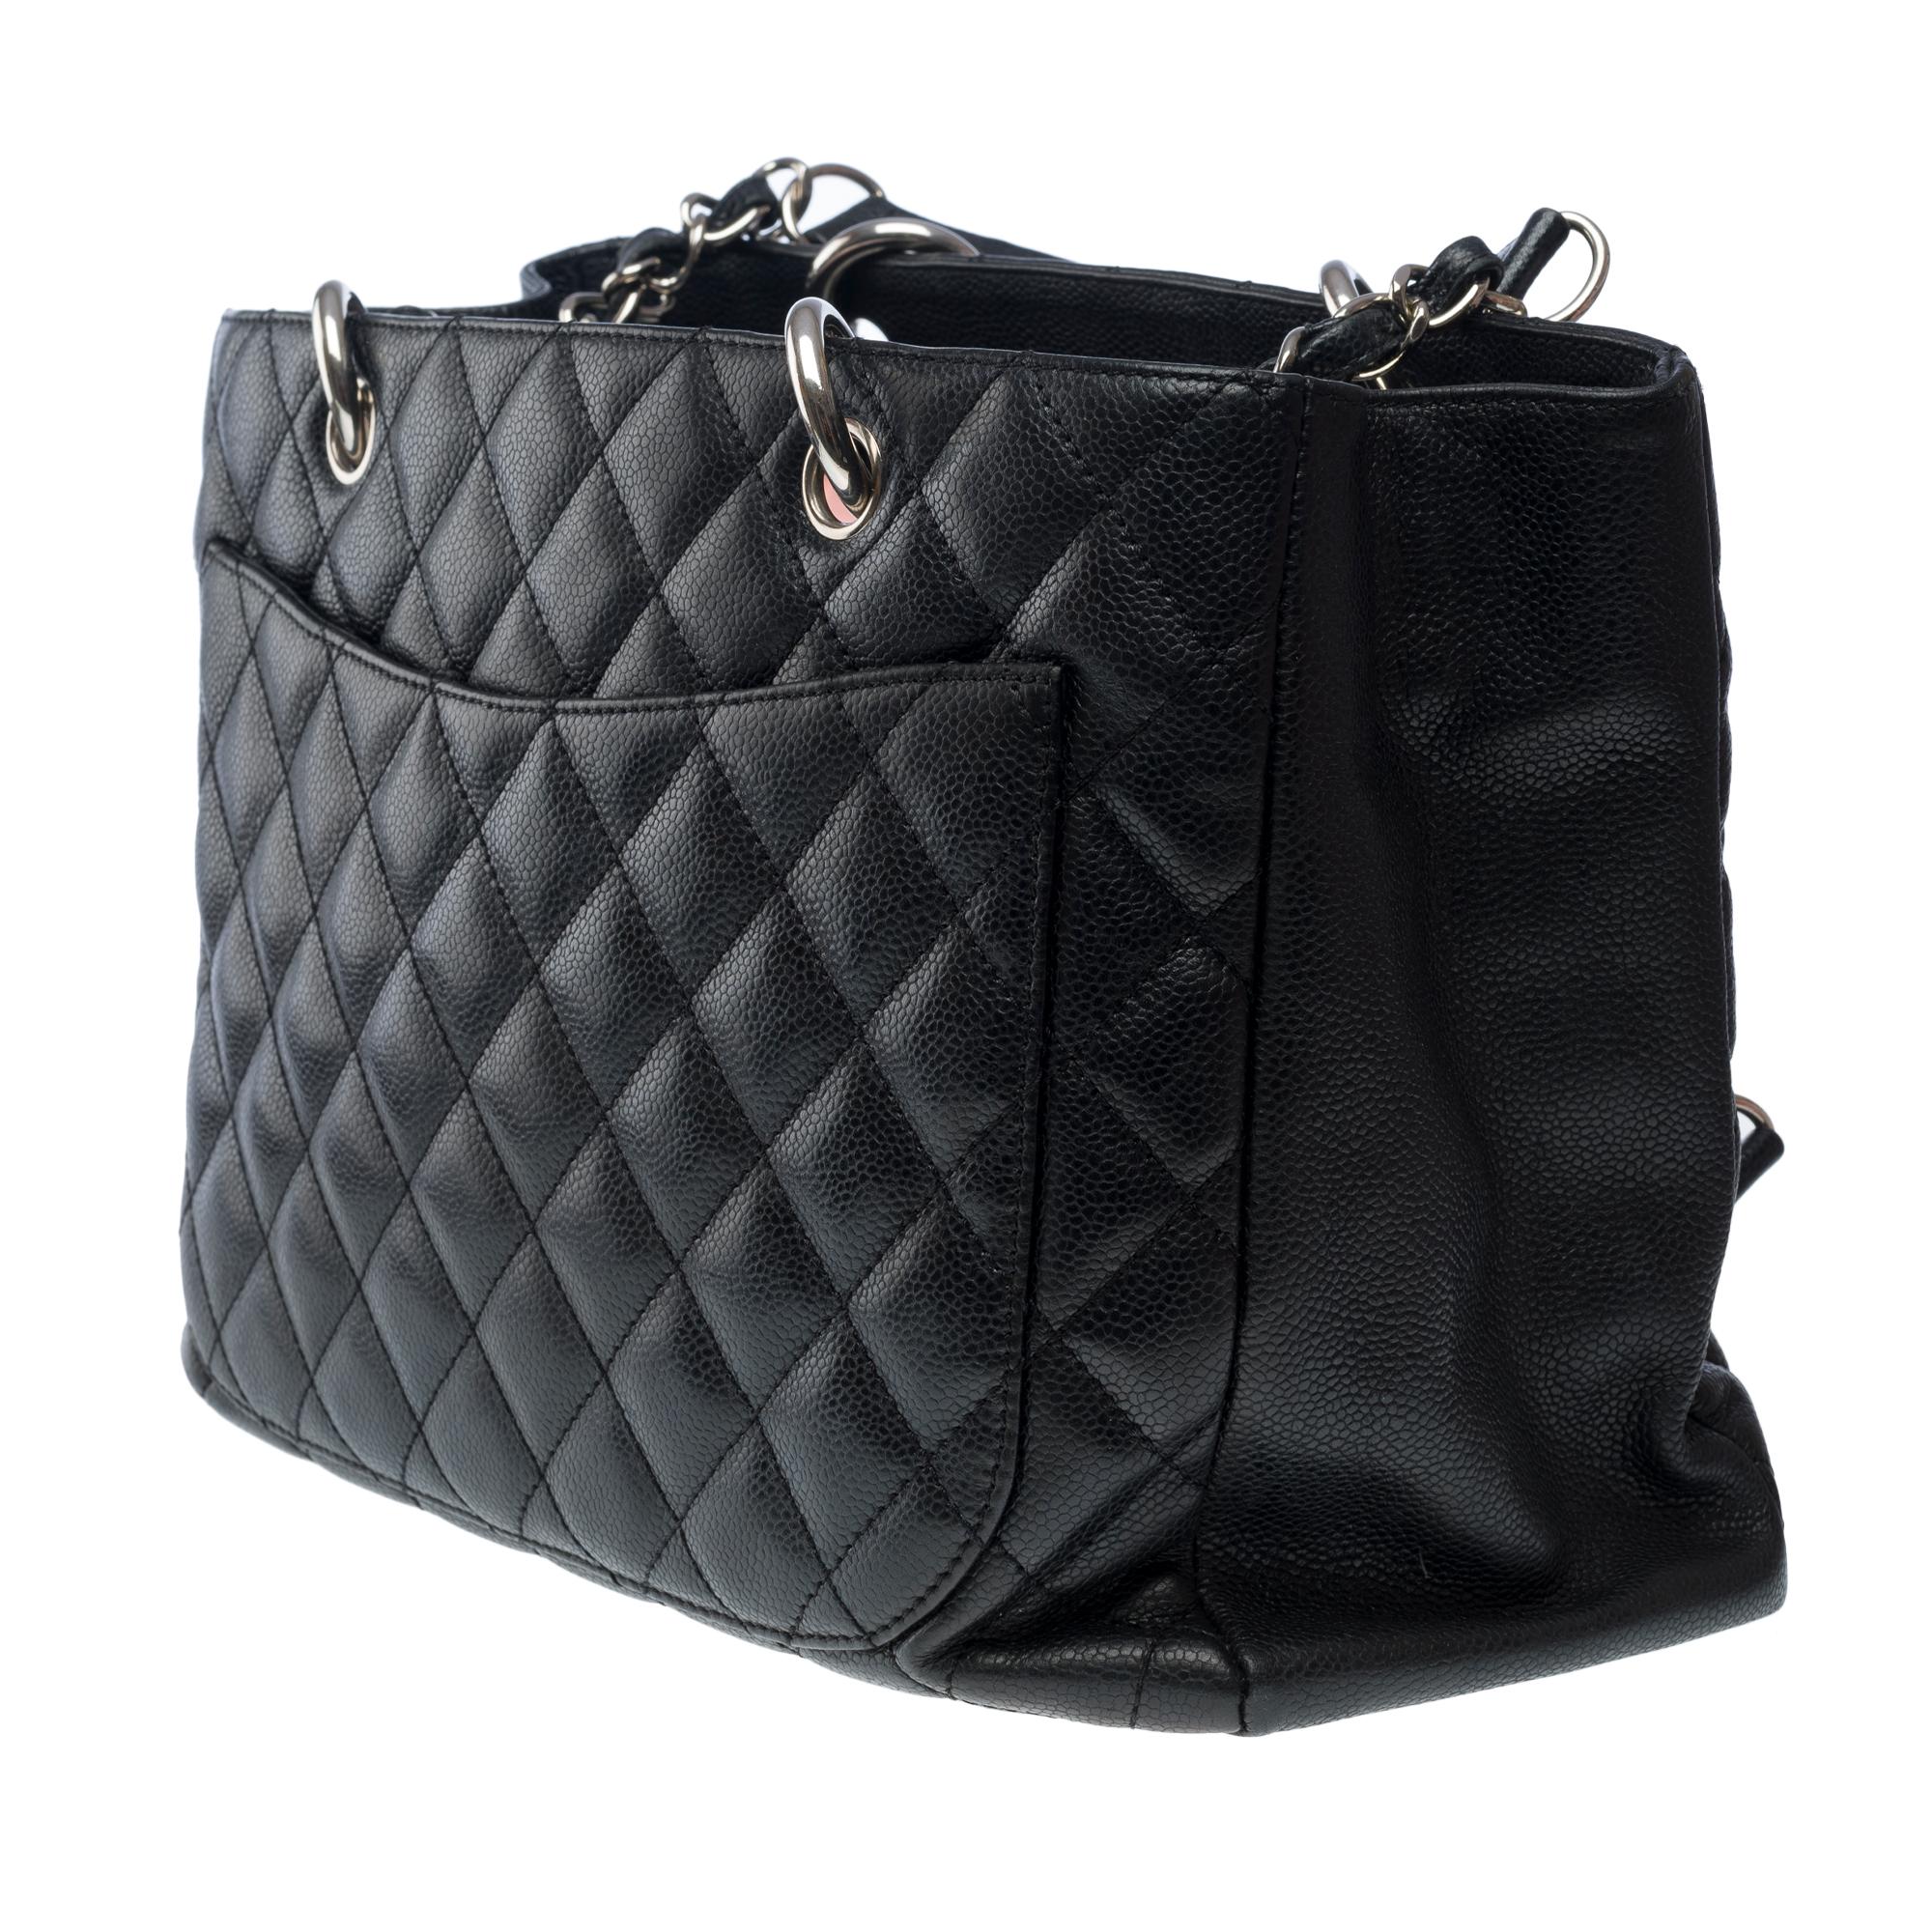  Chanel Grand Shopping Tote bag (GST) in black Caviar quilted leather, SHW For Sale 1